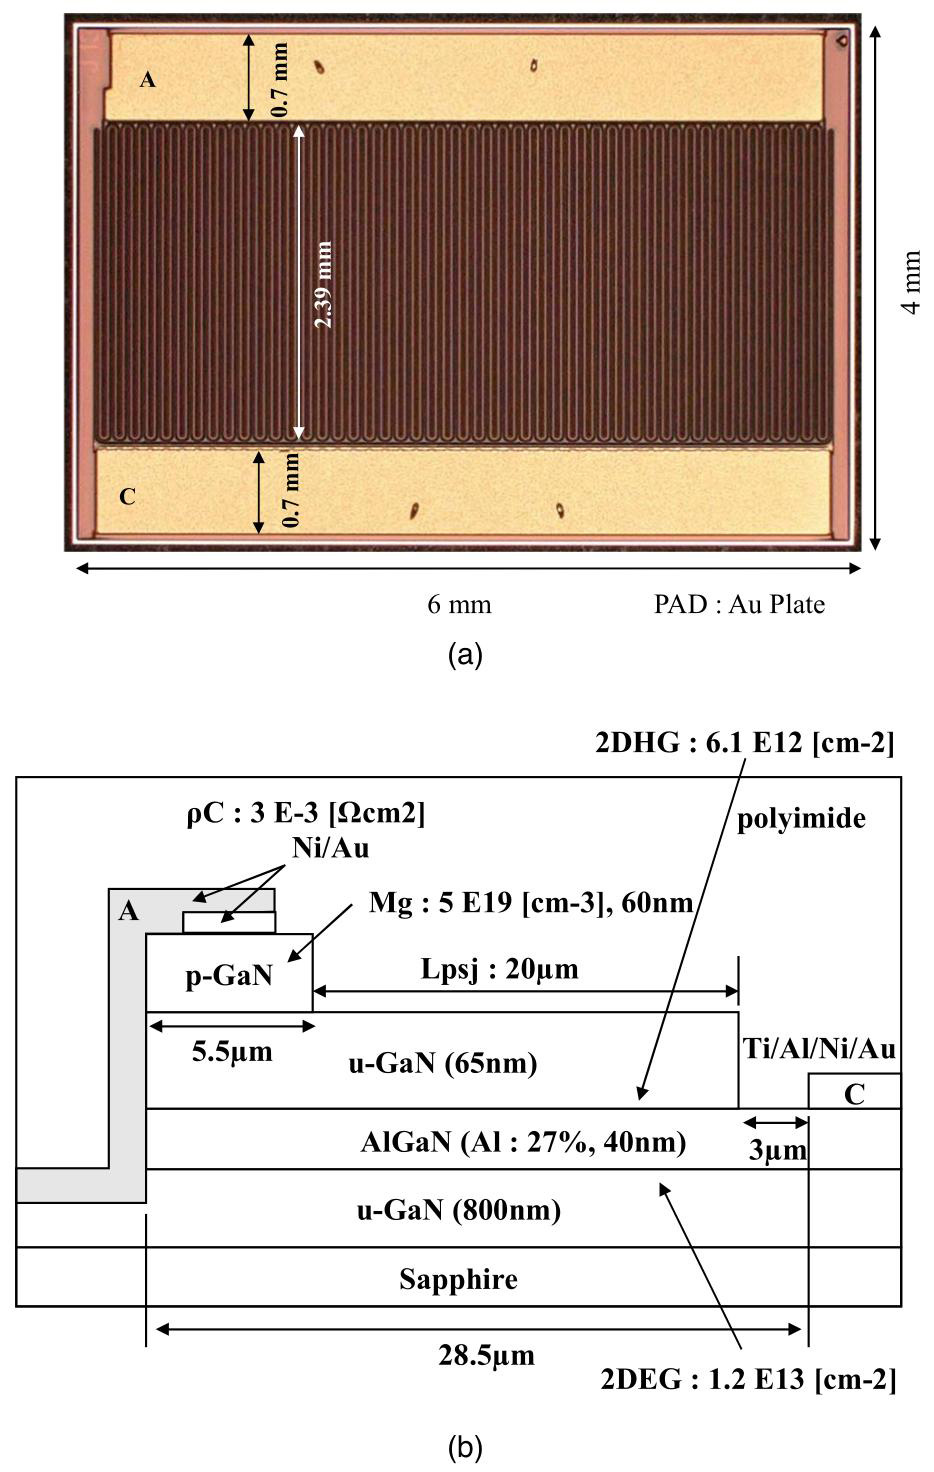 Figure 1: (a) Top view of 1.2kV GaN PSJ diode chip and (b) cross-sectional schematic structure.